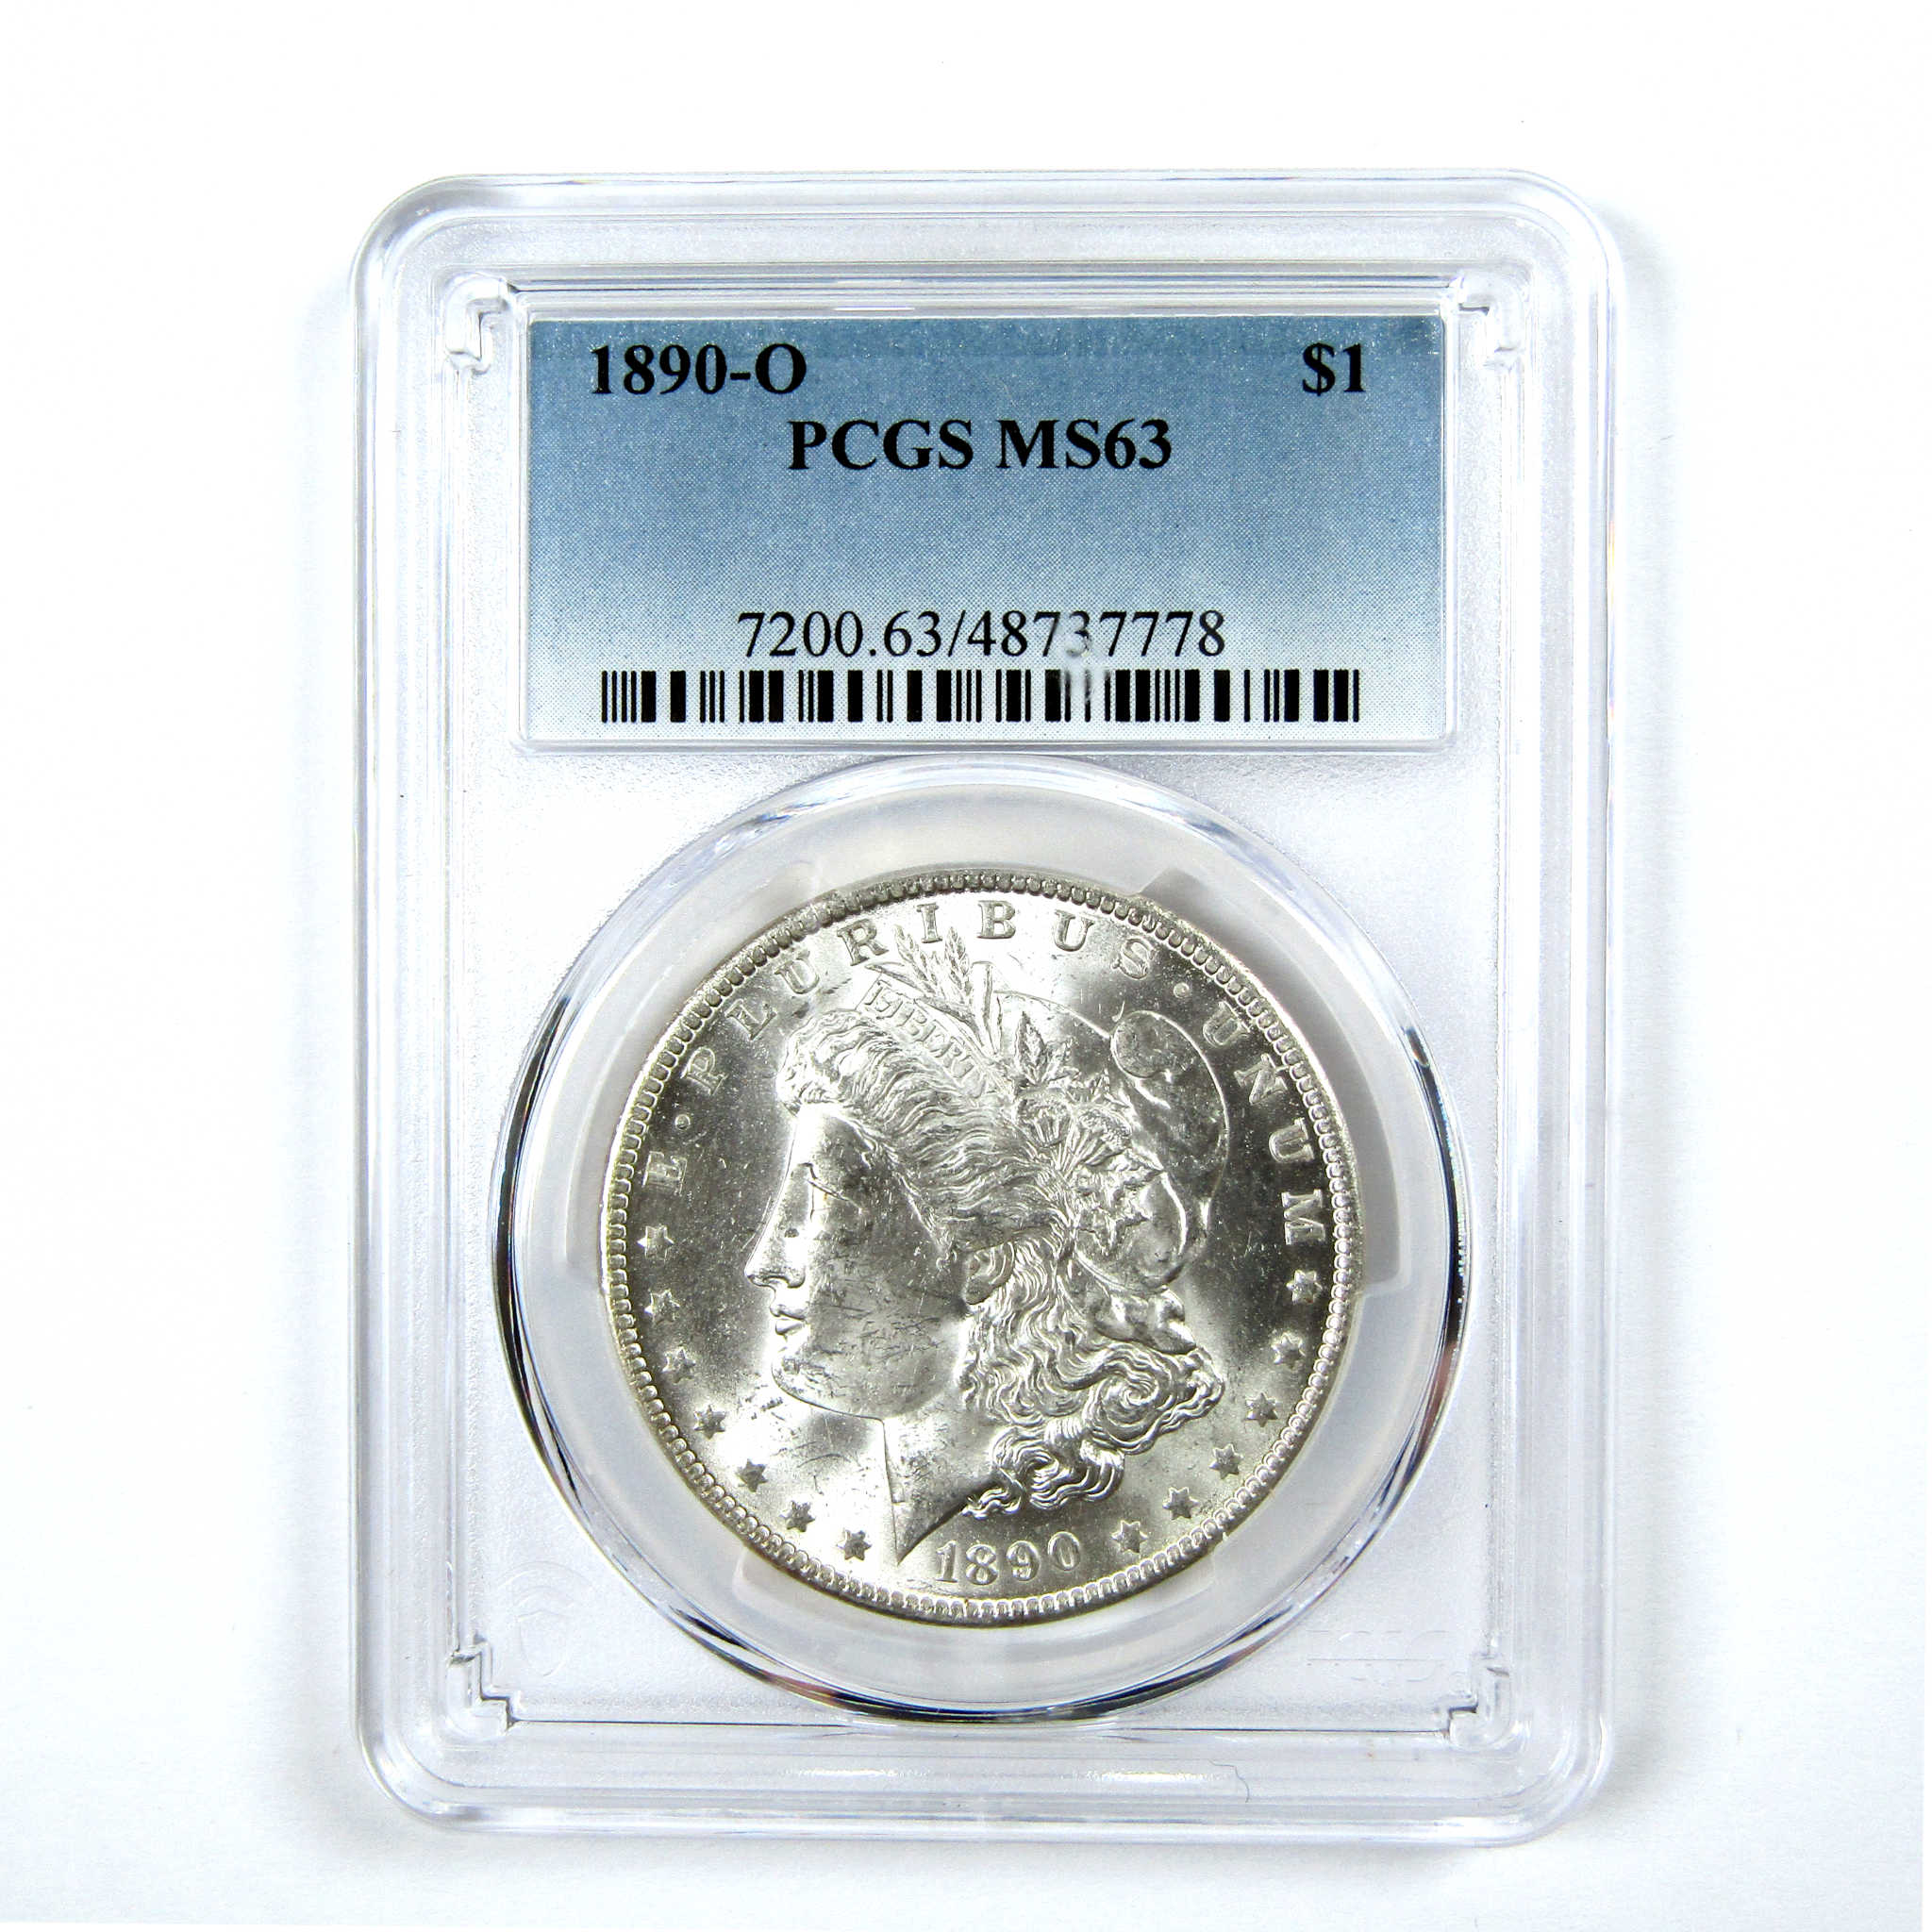 1890 O Morgan Dollar MS 63 PCGS Silver $1 Uncirculated Coin SKU:I13918 - Morgan coin - Morgan silver dollar - Morgan silver dollar for sale - Profile Coins &amp; Collectibles